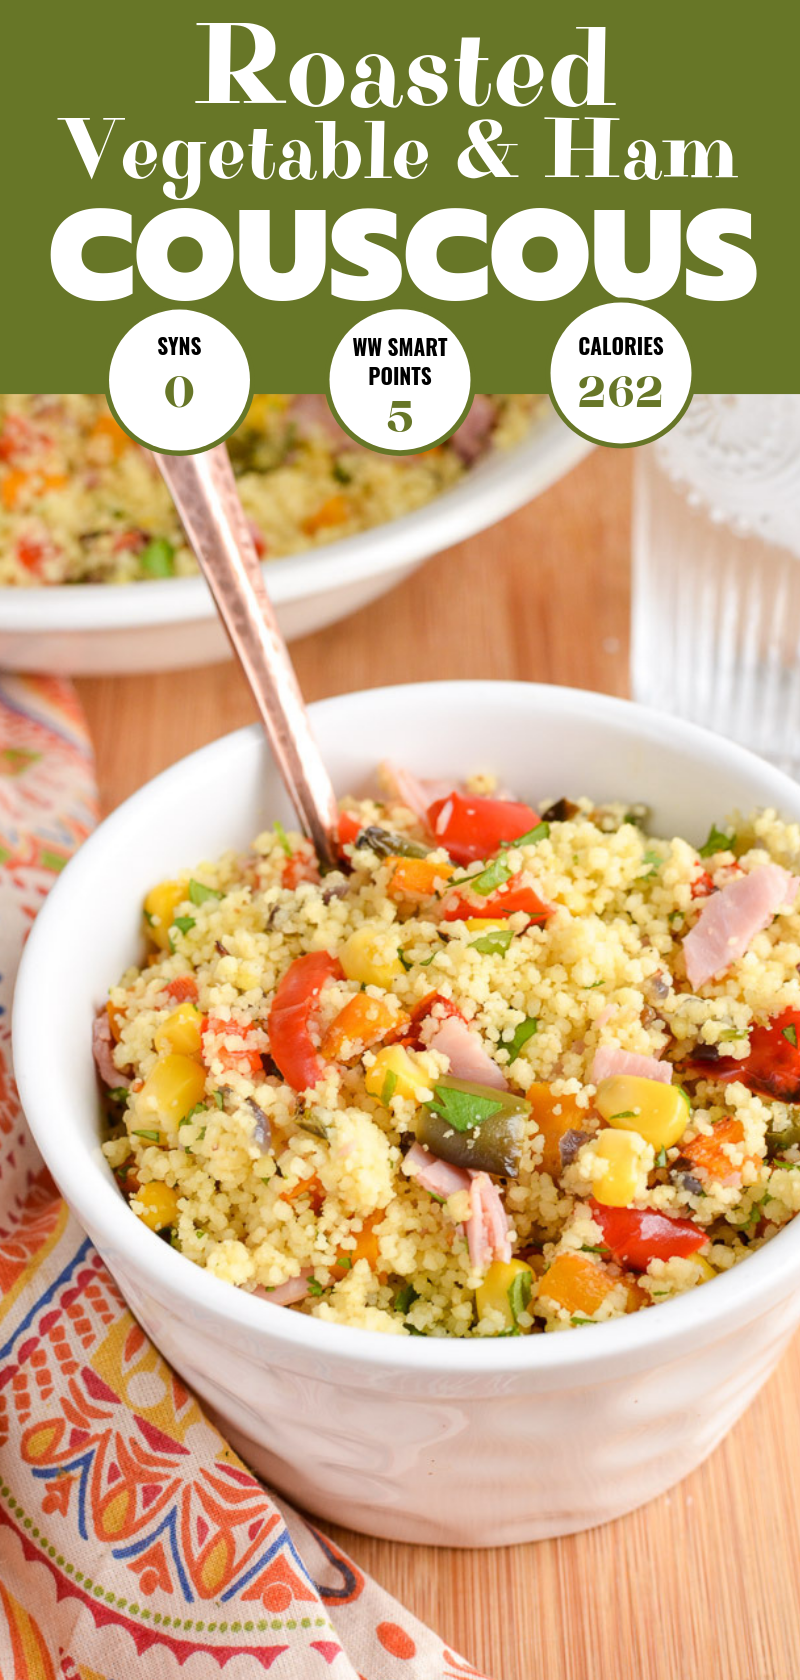 ROASTED VEGETABLE AND HAM COUSCOUS PIN IMAGE